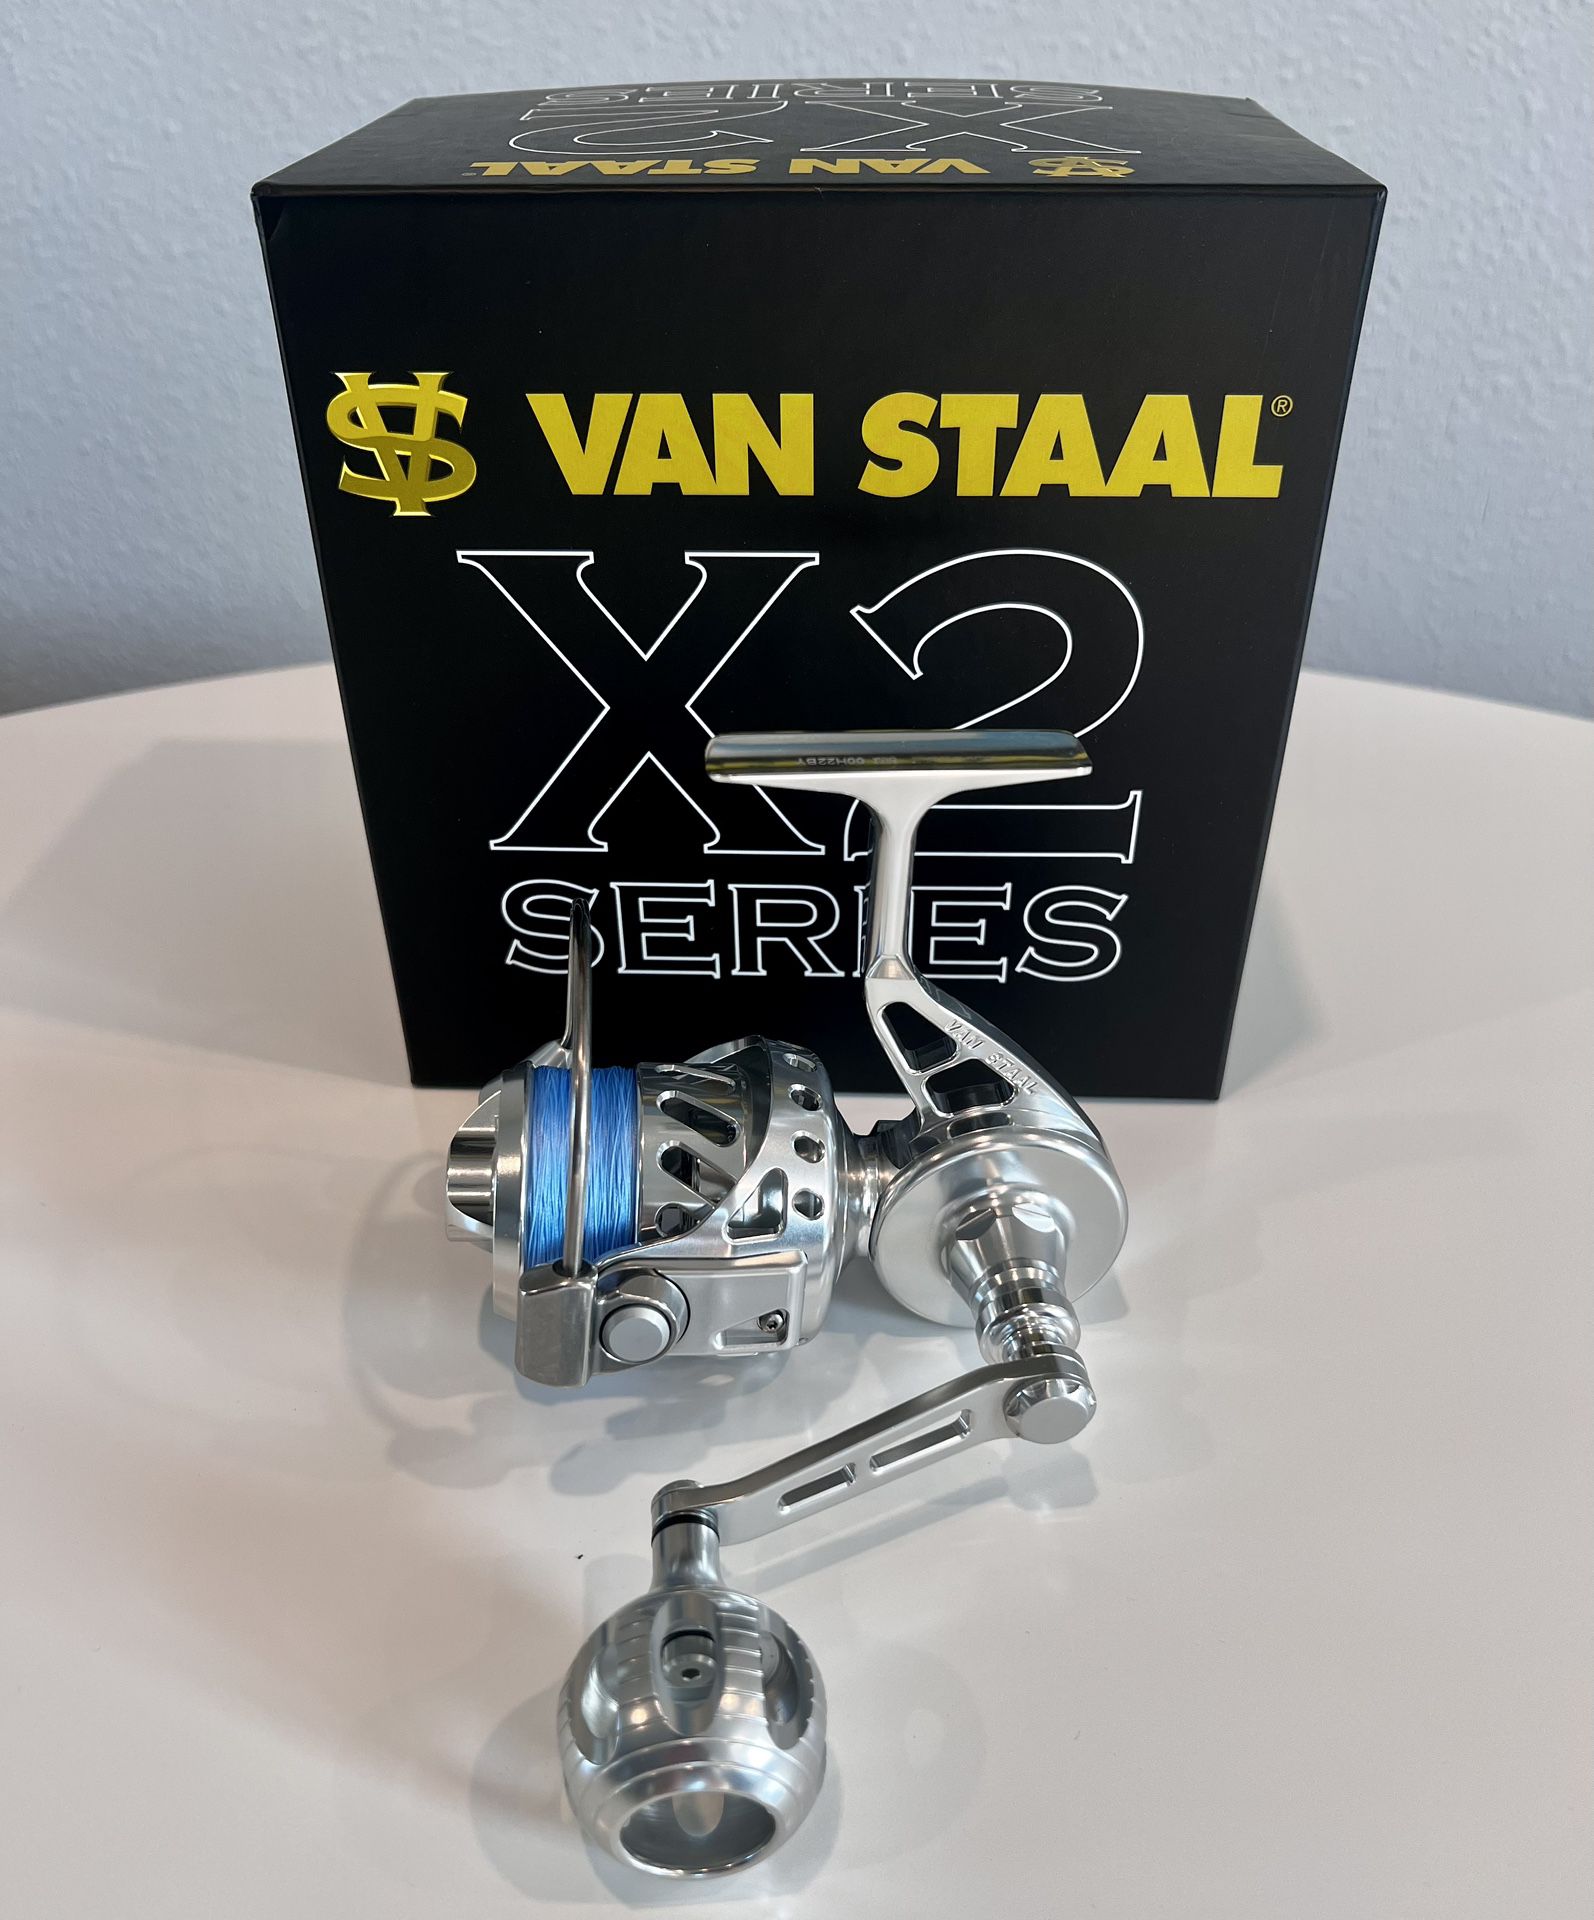 Van Staal VSB50SX2 Spinning Reel *New With Braid for Sale in Tampa